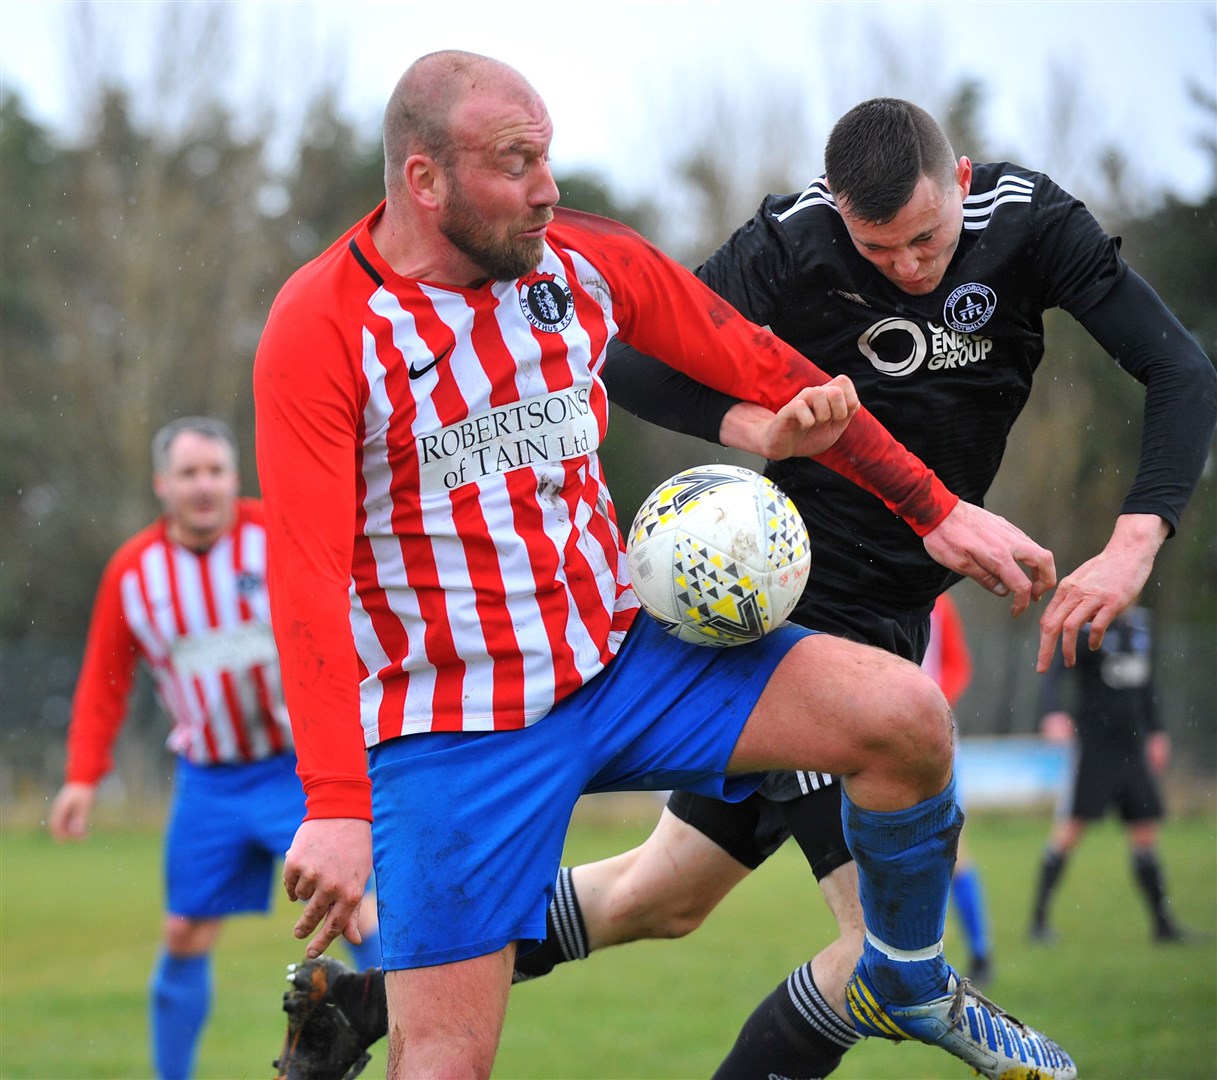 St Duthus's Ross Tokely wins a tussle with his Invergordon counterpart. Picture: Graeme Webster